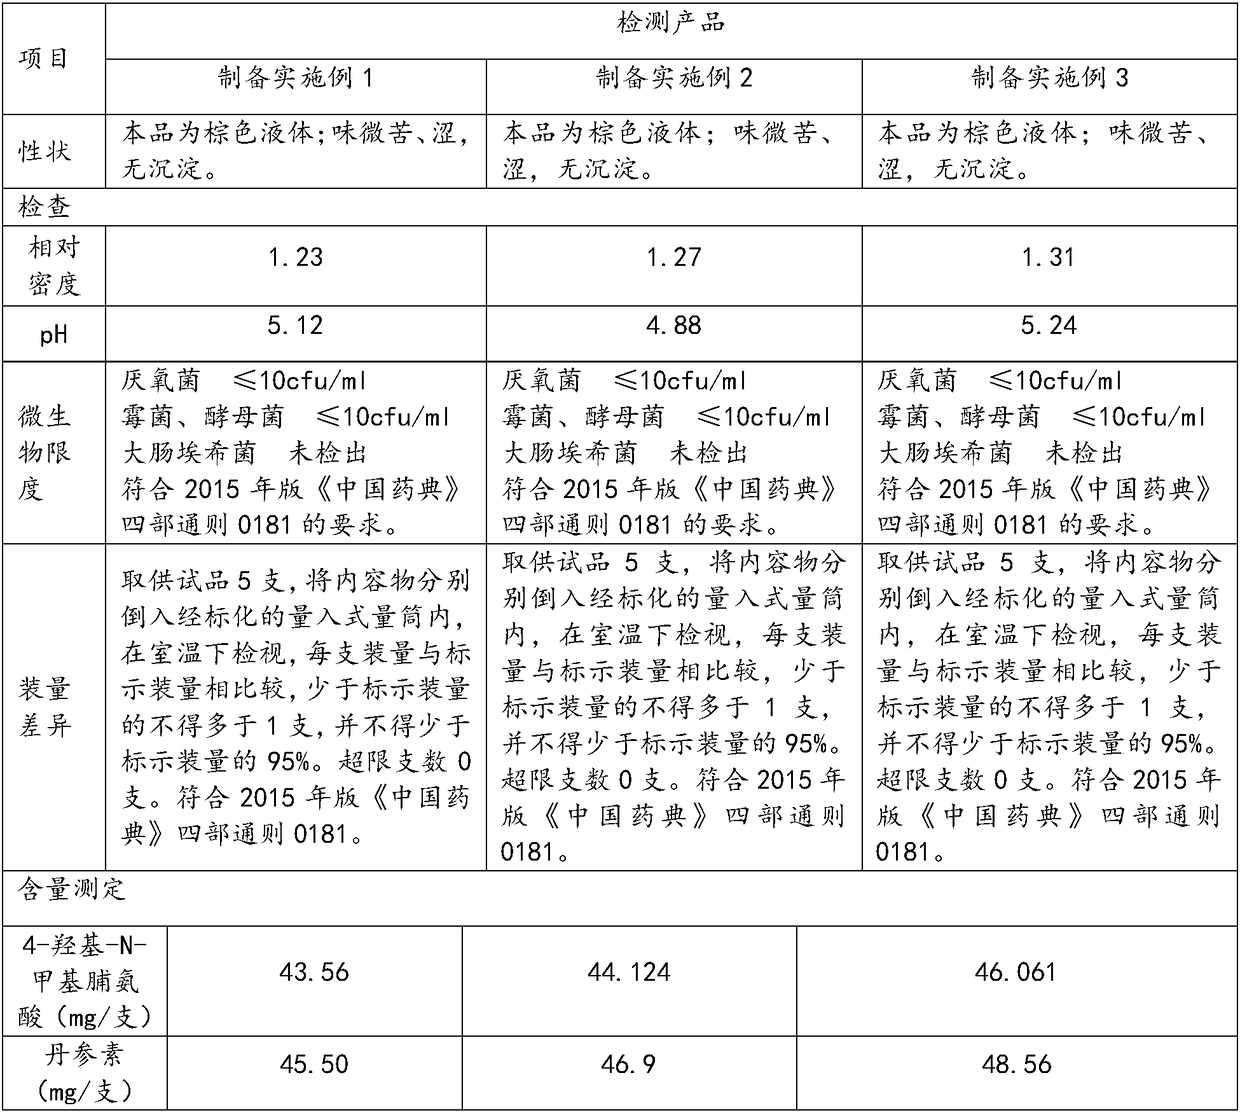 Preparation method of compound nerve-calming traditional Chinese medicine oral liquid